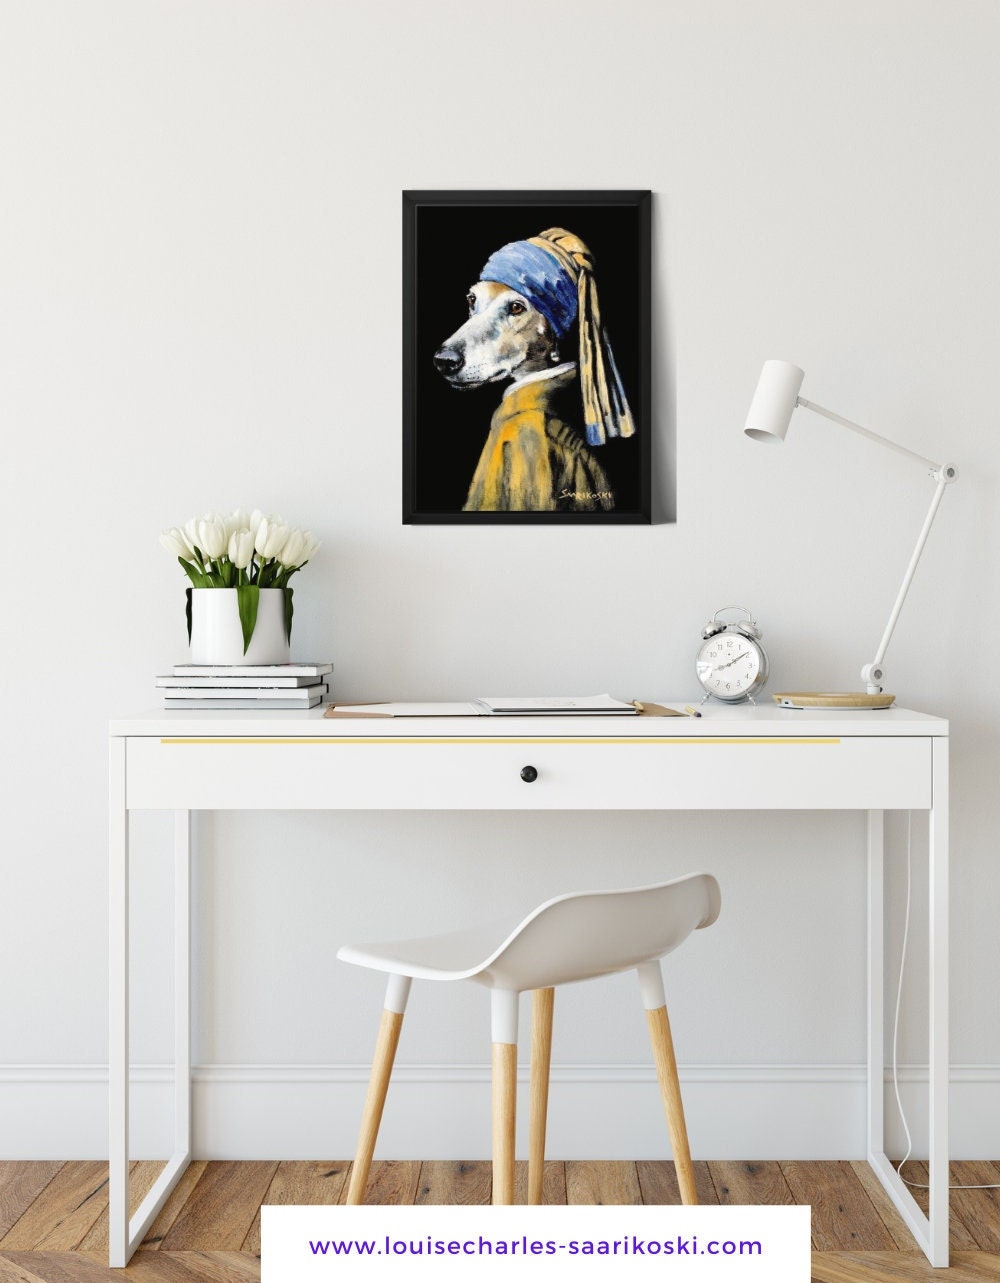 Galgo With a Pearl Earring Canvas Art Print in a Black Float - Etsy